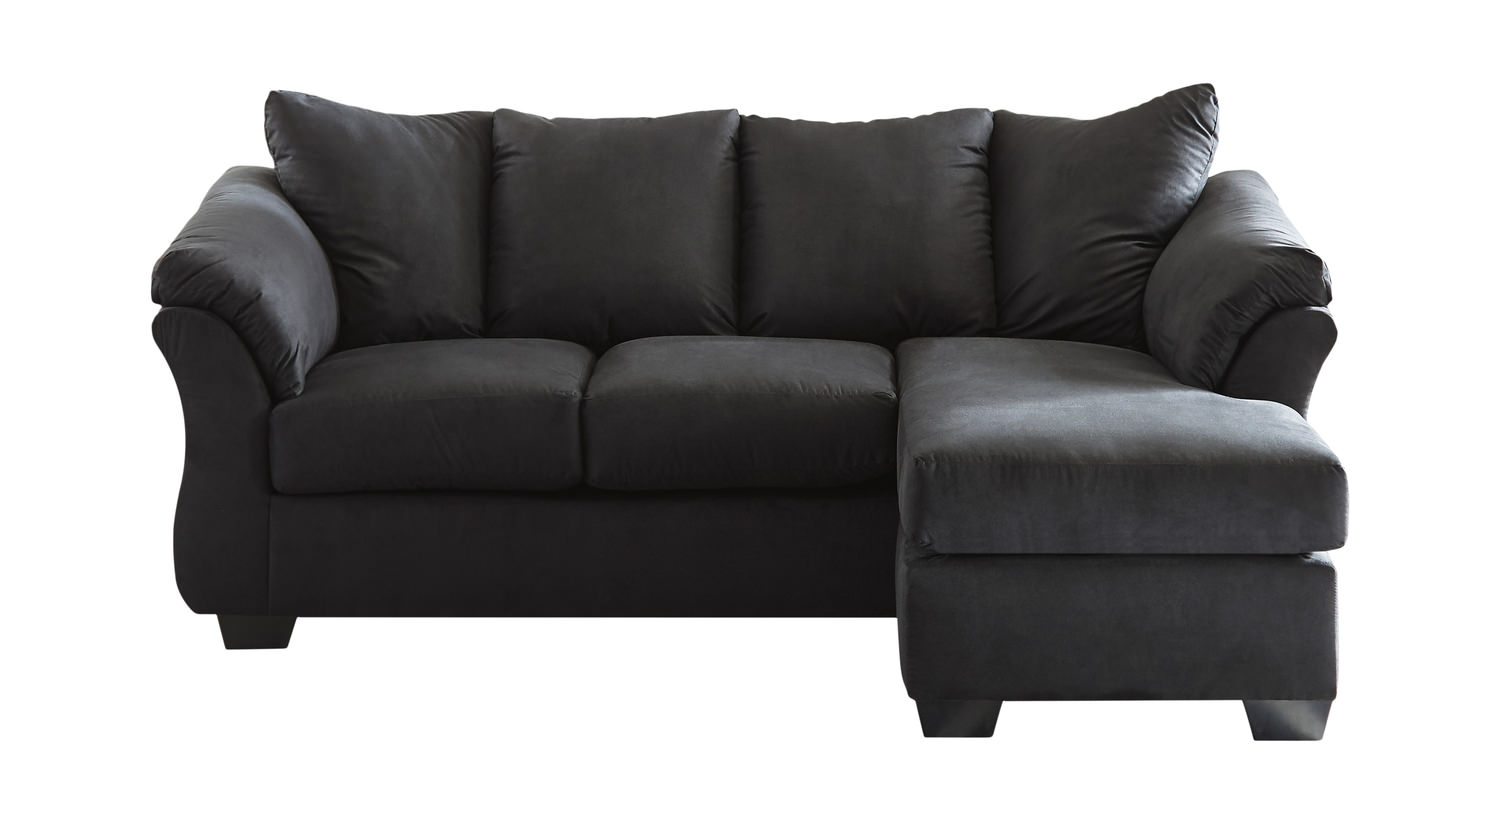 Almath Sofa With Reversible Chaise - Black